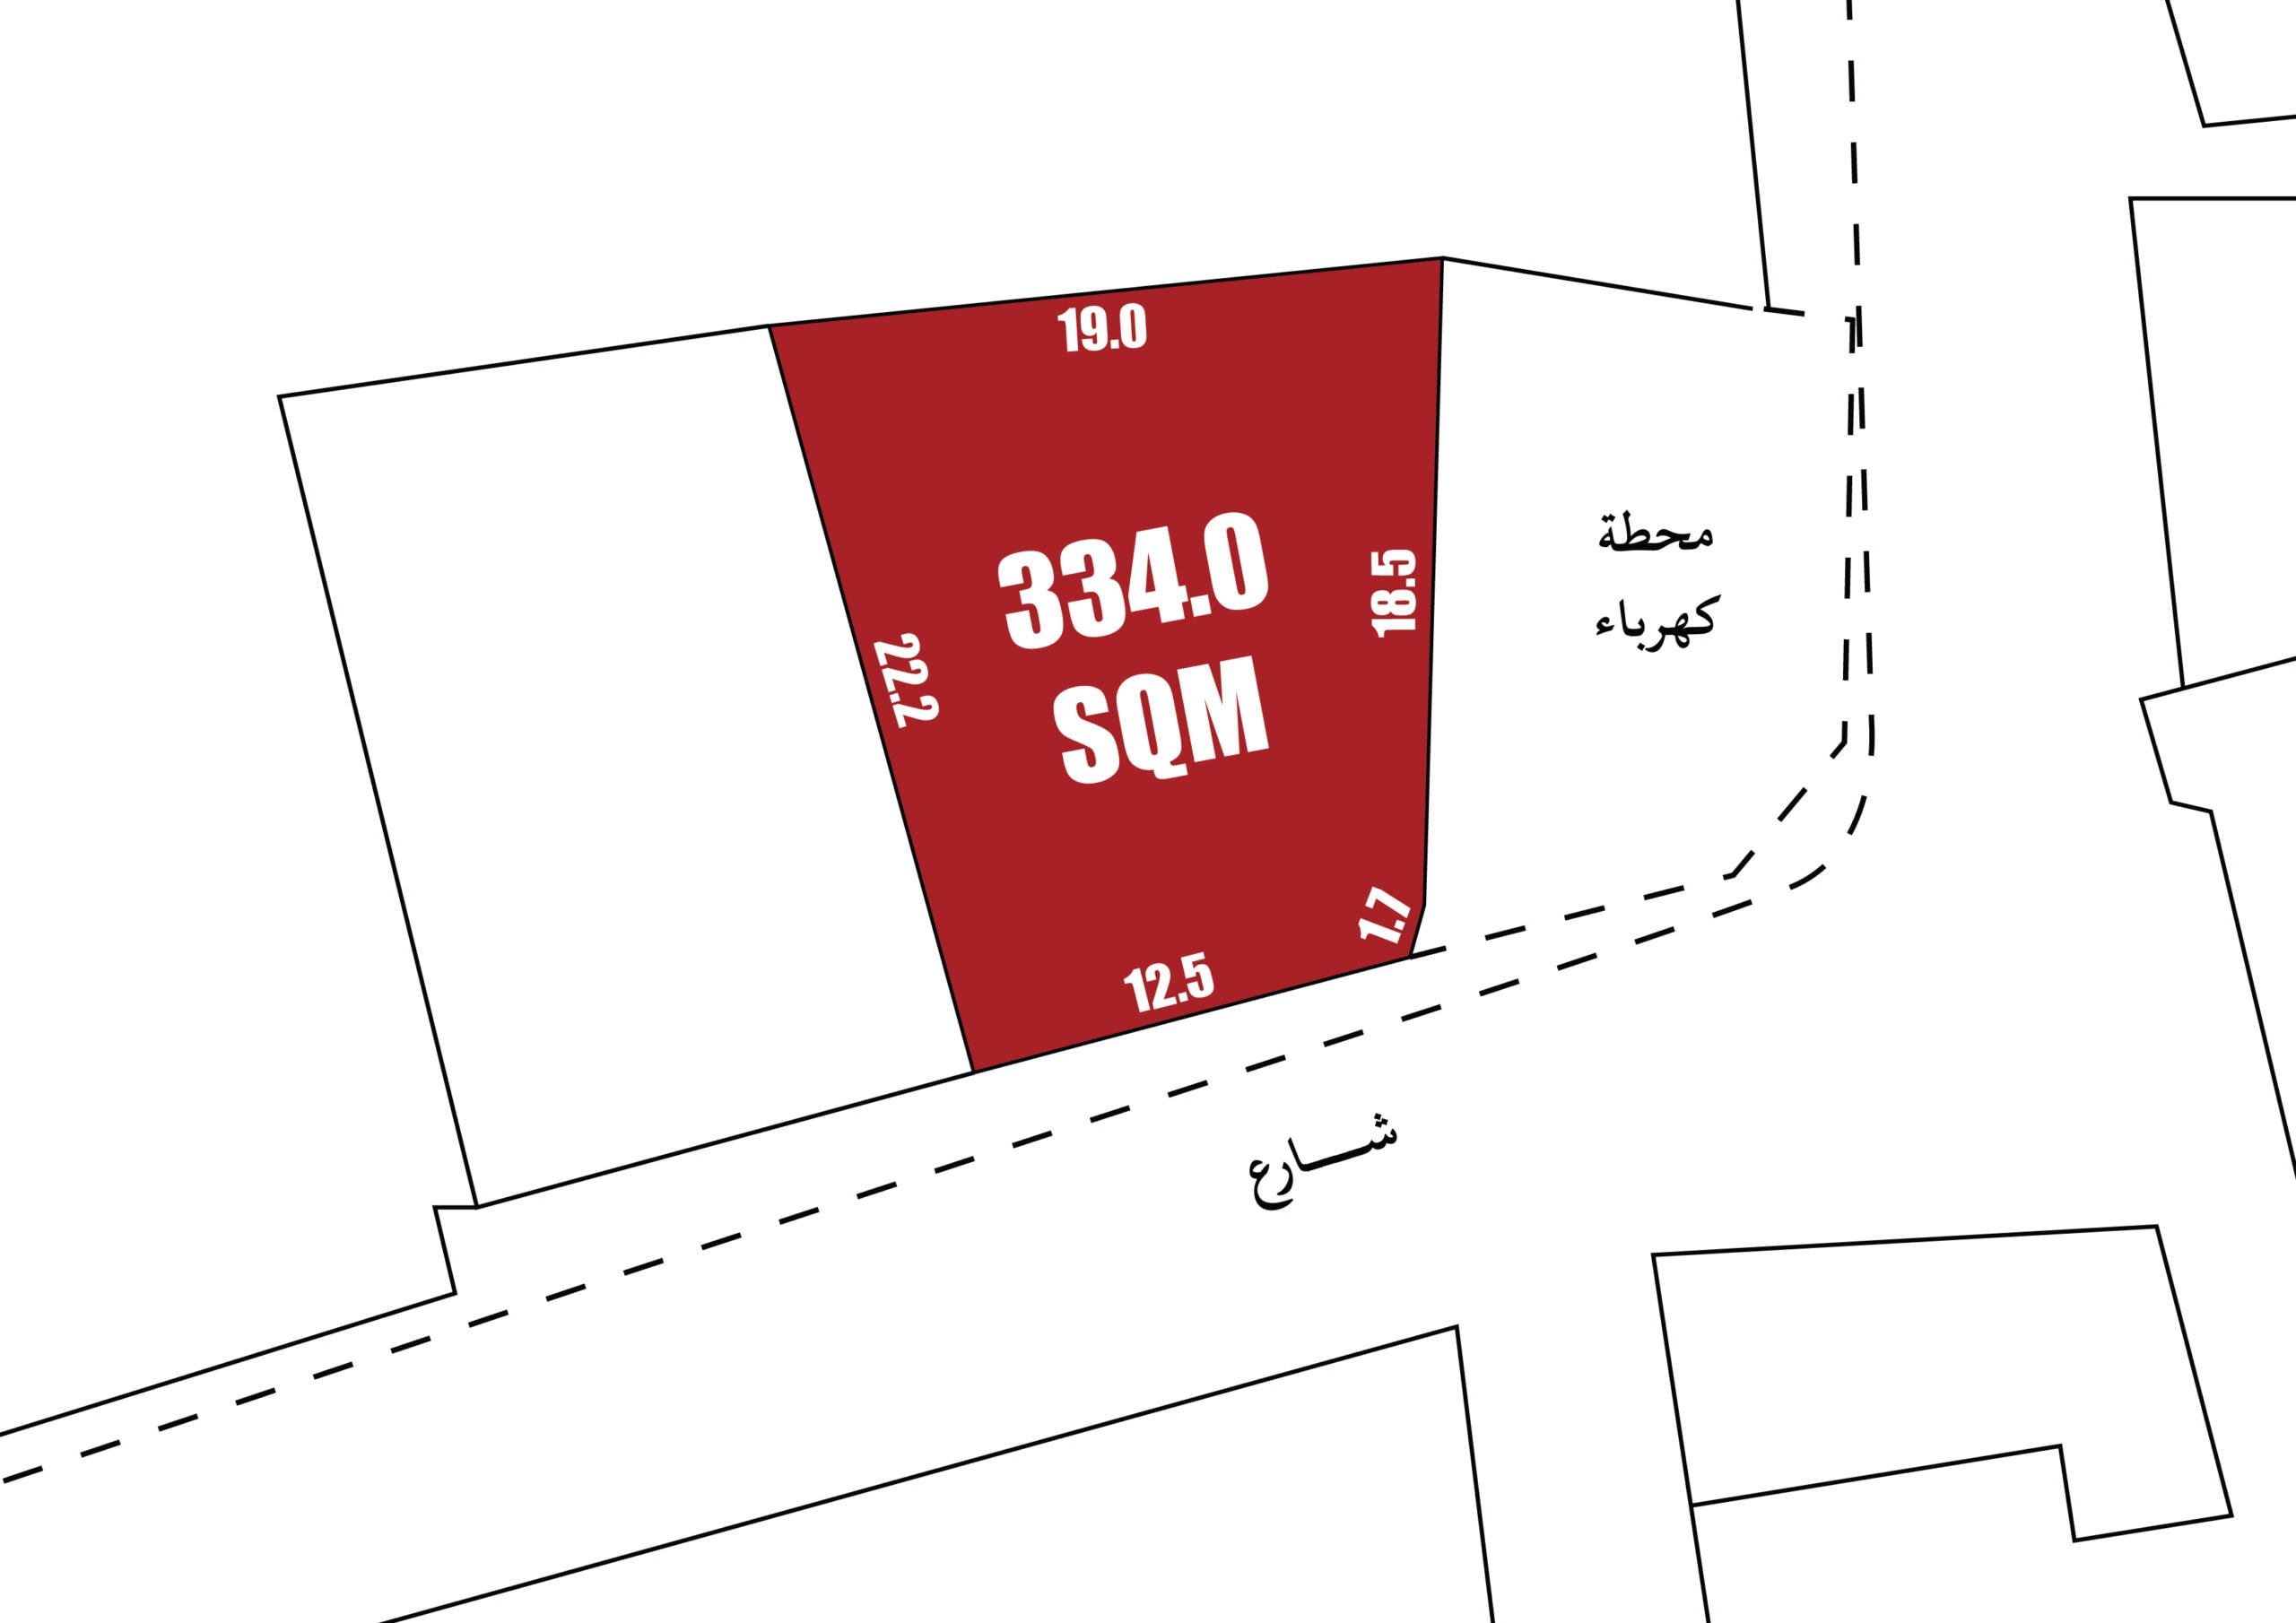 Land plot diagram with area marked as 334.0 sqm and dimensions in meters, showing request by Laura Acosta on Instagram.